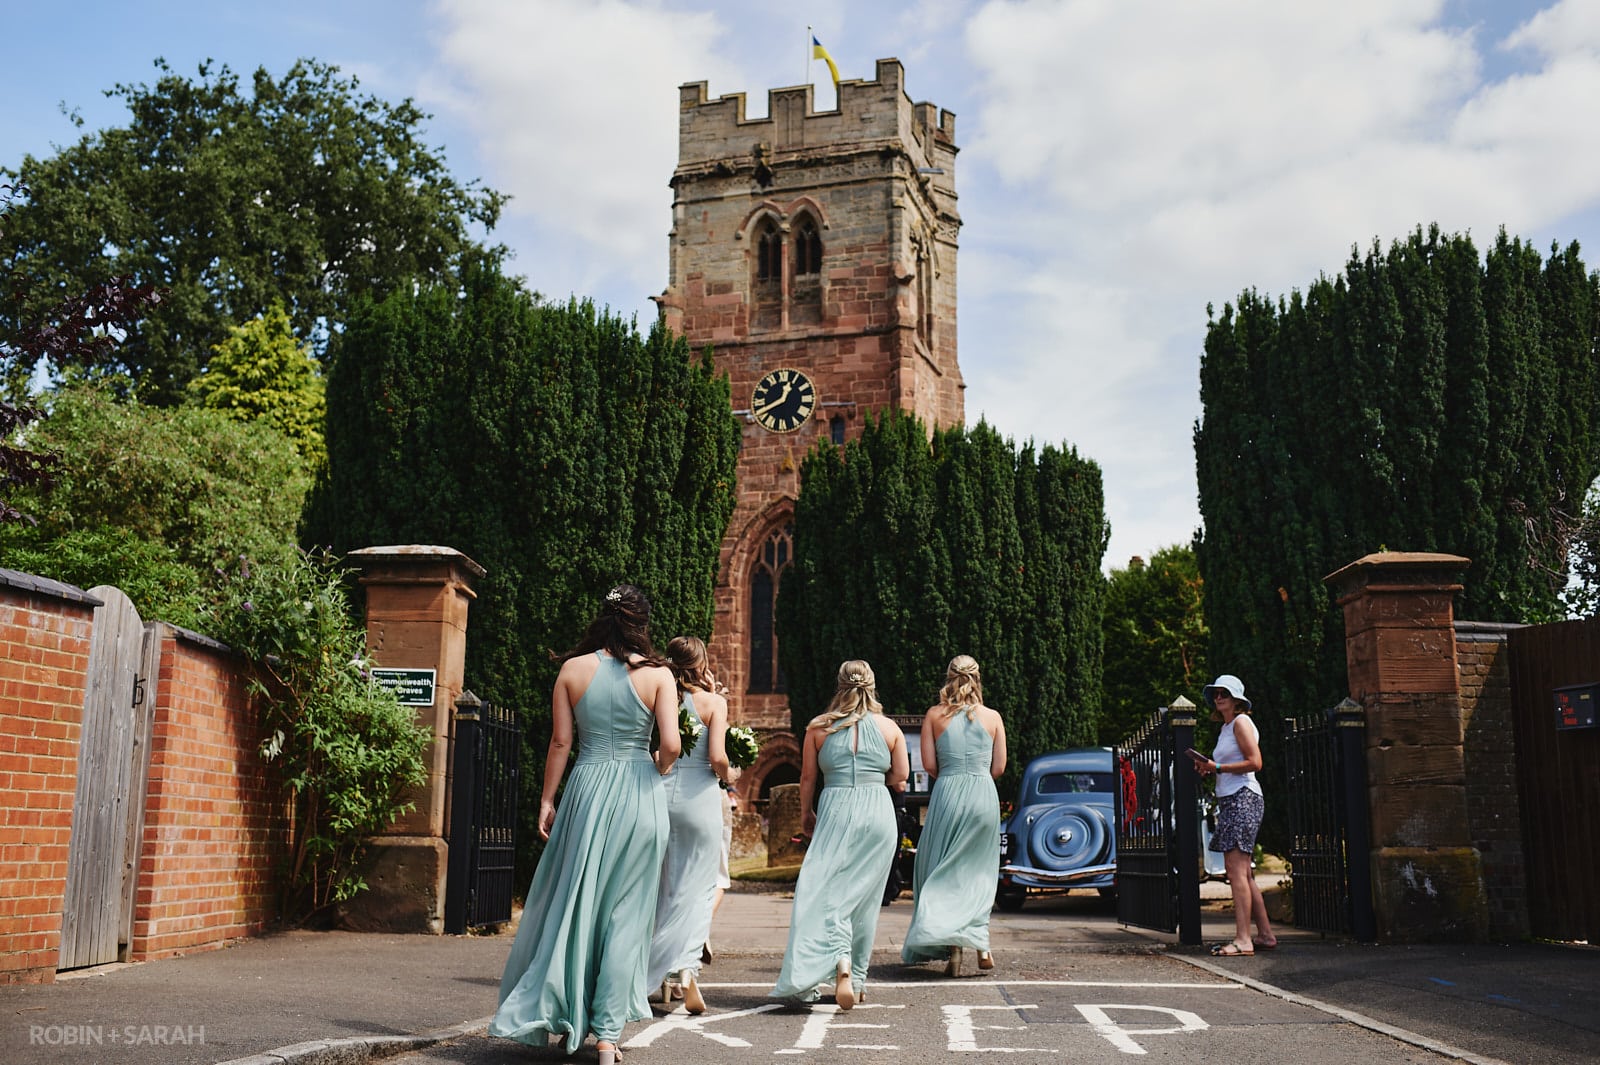 Bridesmaids arrive at Bride arrives at St Peter's church Dunchurch for wedding ceremony for wedding ceremony